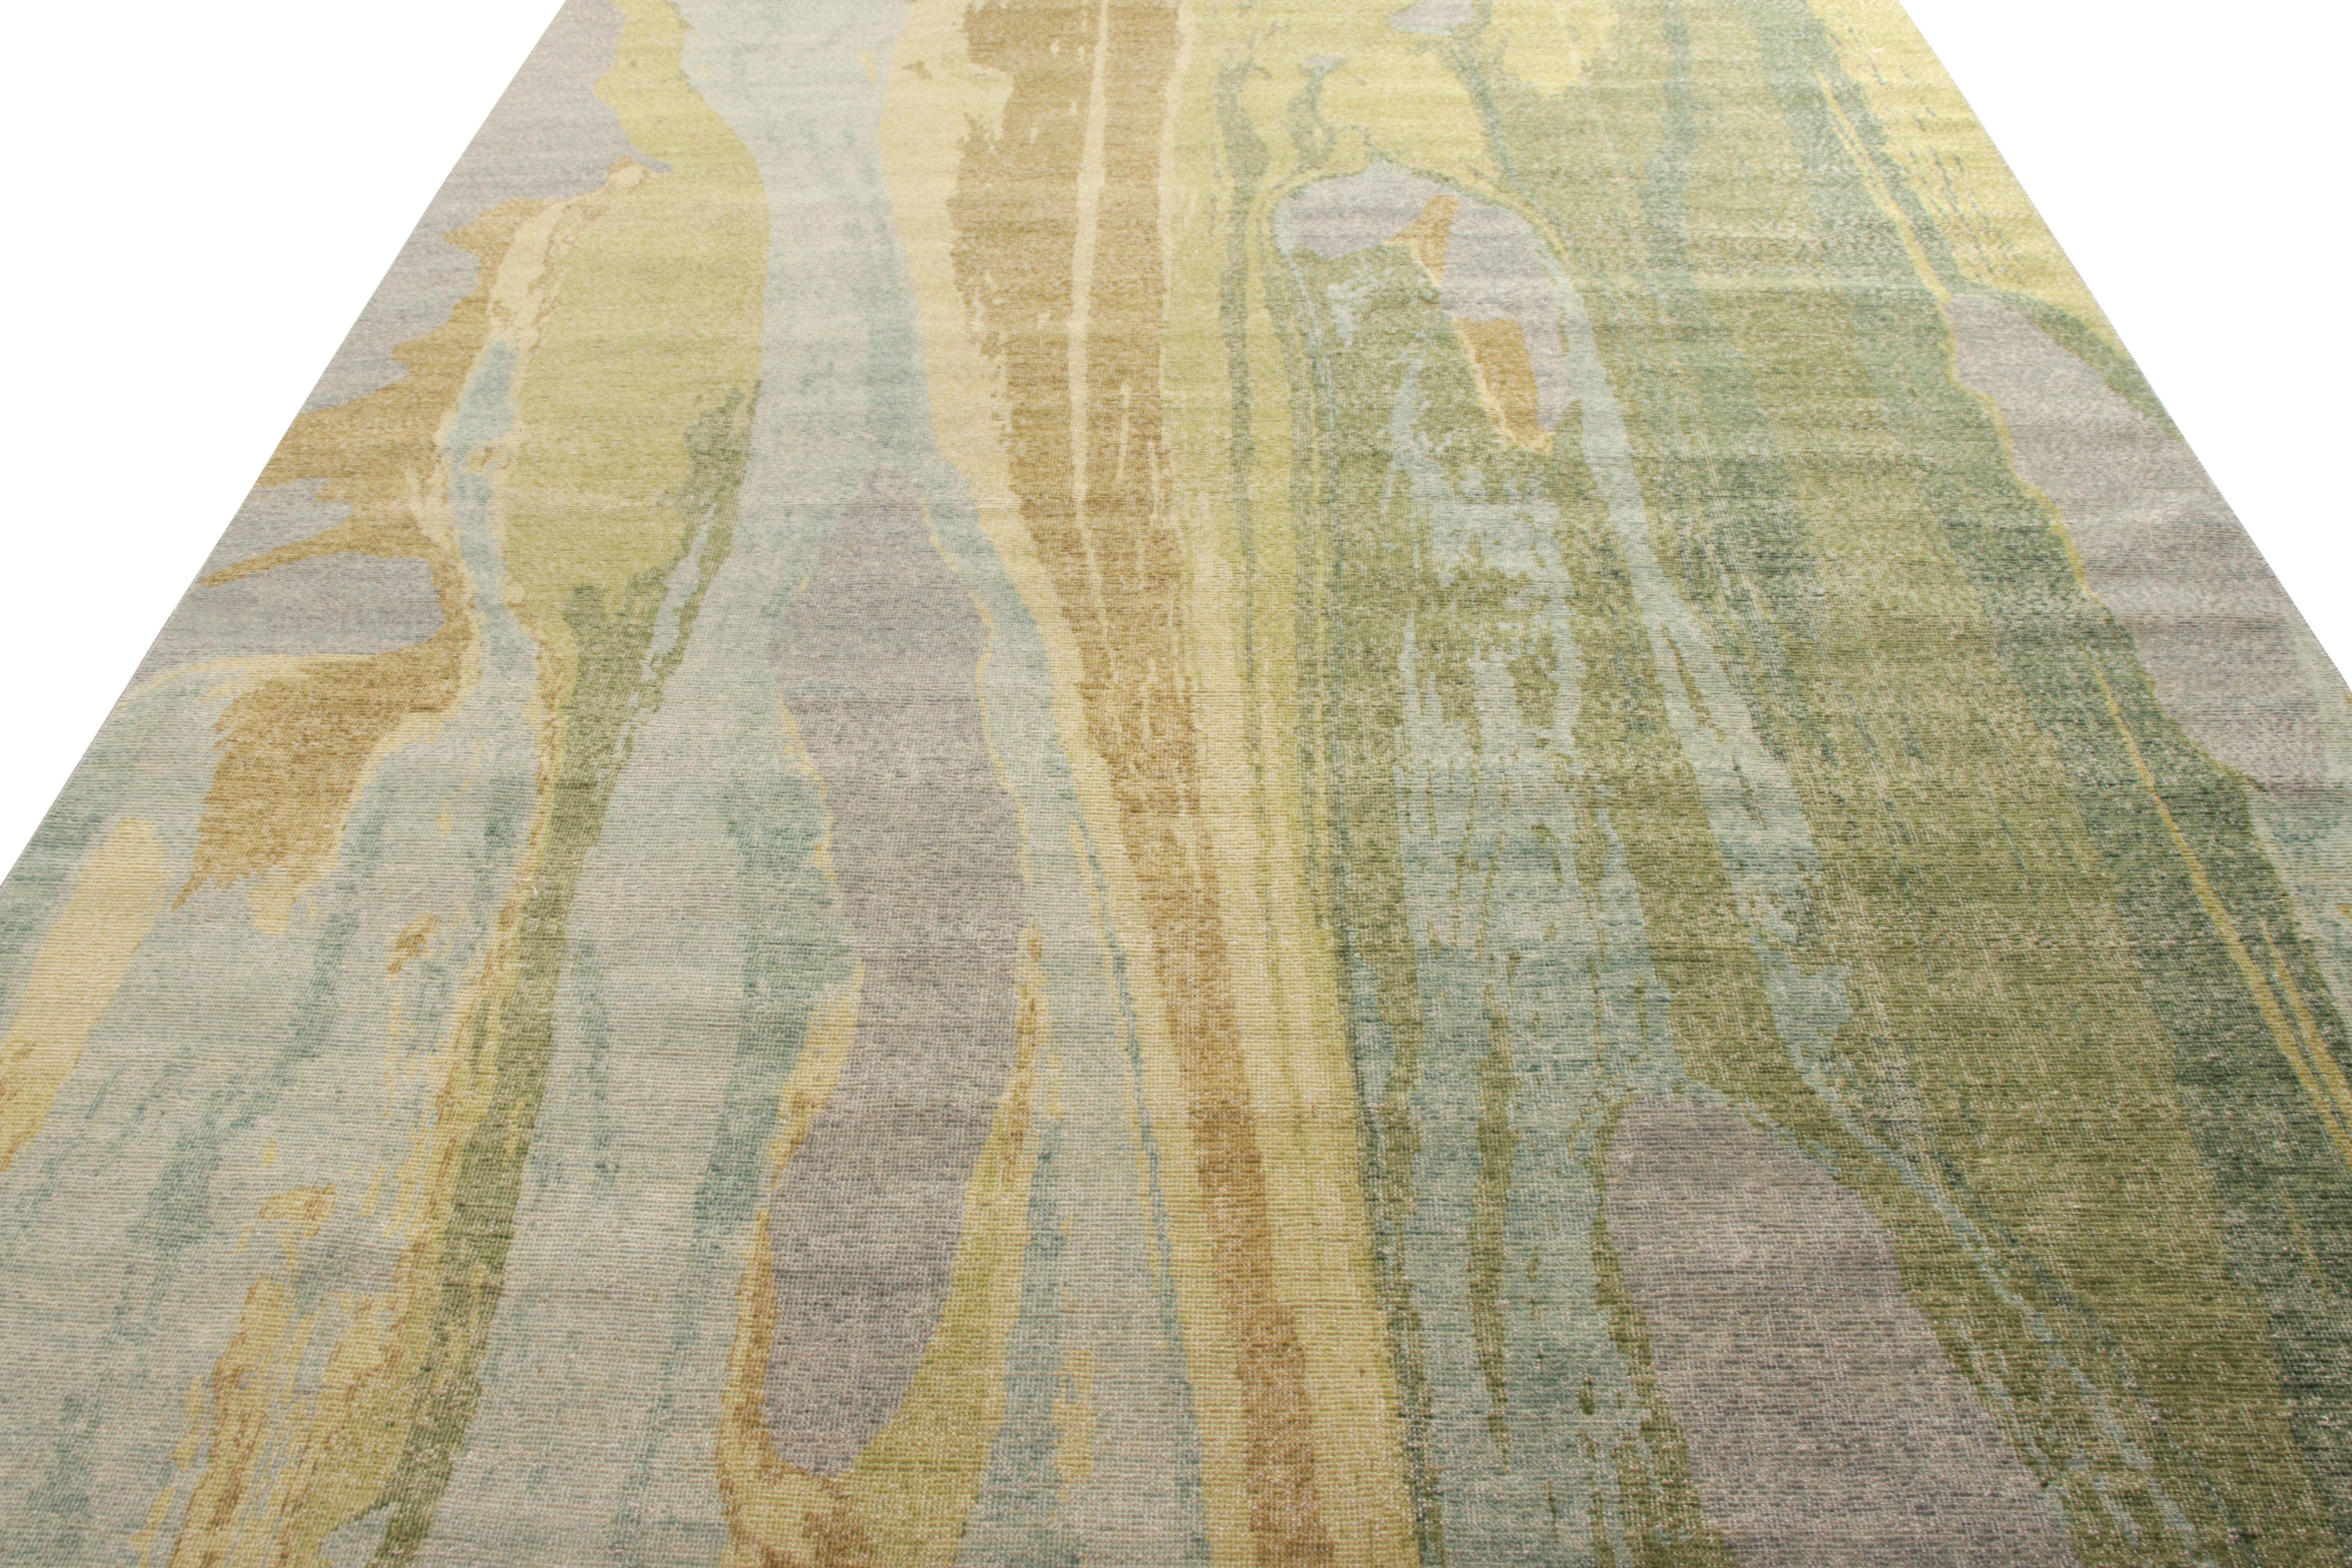 A unique take on abstract design, Rug & Kilim welcomes this 9 x 12 addition to the modern selections in their distressed style Homage Collection. The rug cherishes a smooth pattern in a soothing blue, green, and beige-yellow hues similar to a marble